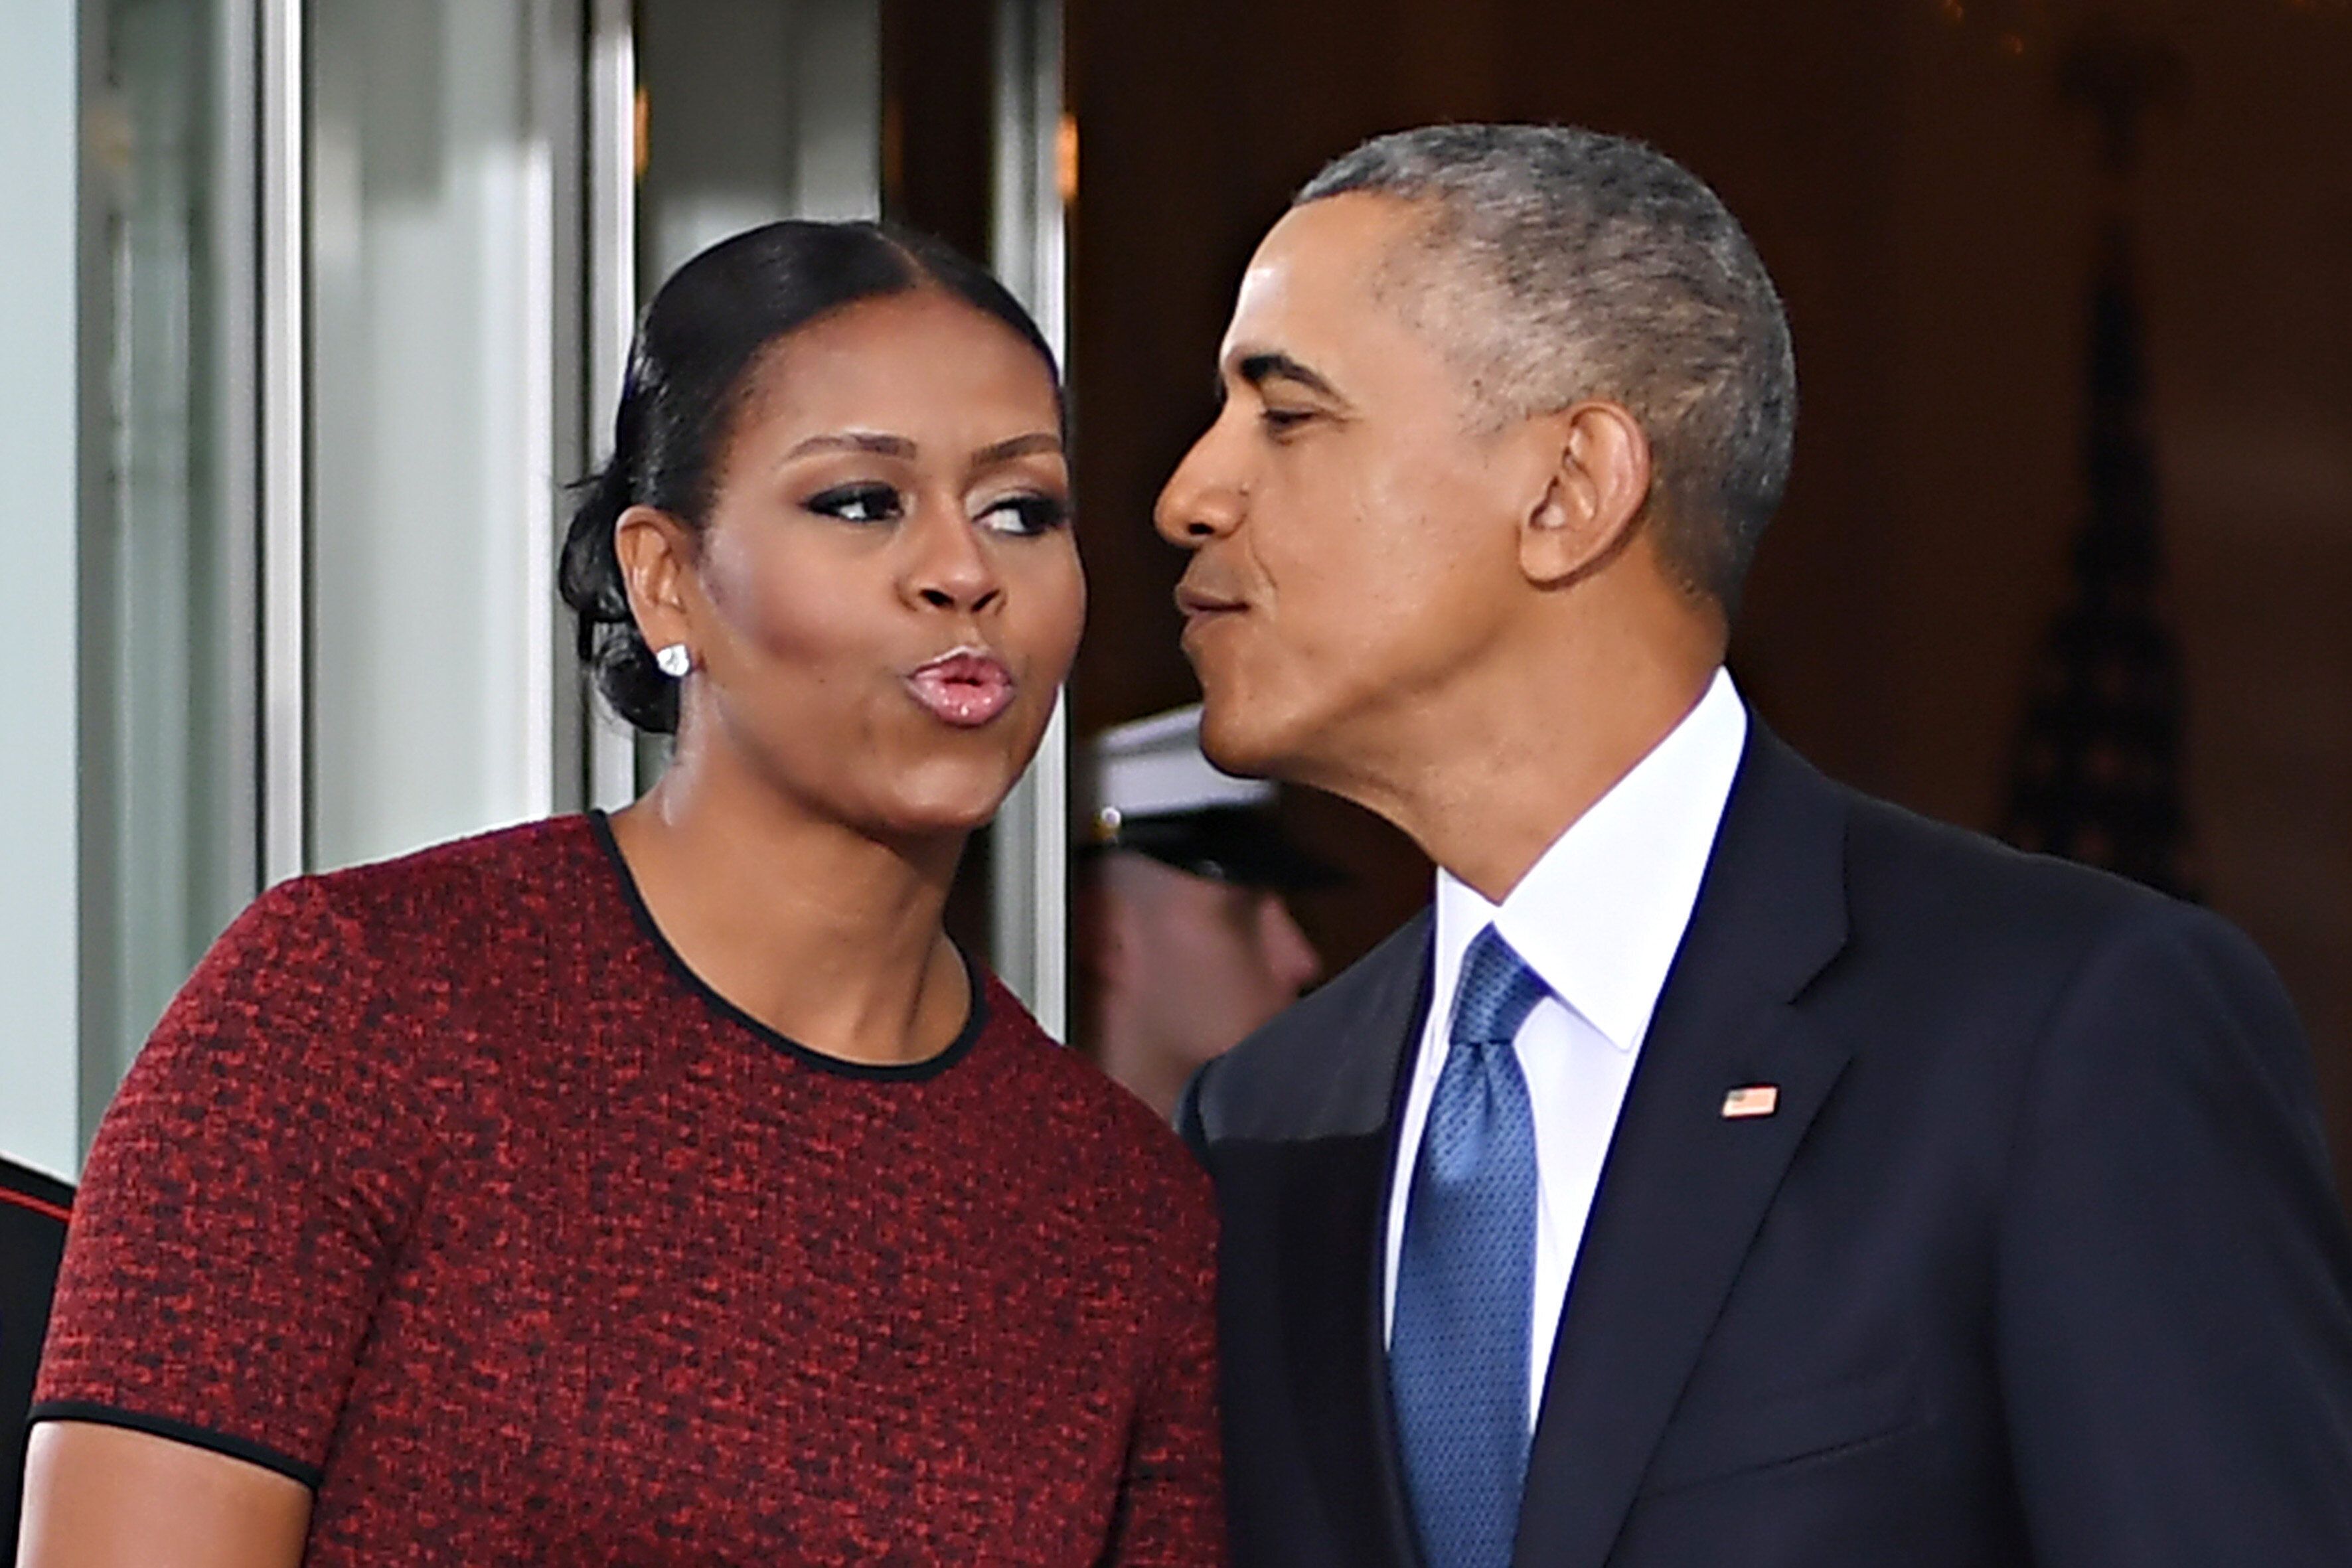 listen to michelle obama and save your marriage by avoiding this big mistake 1